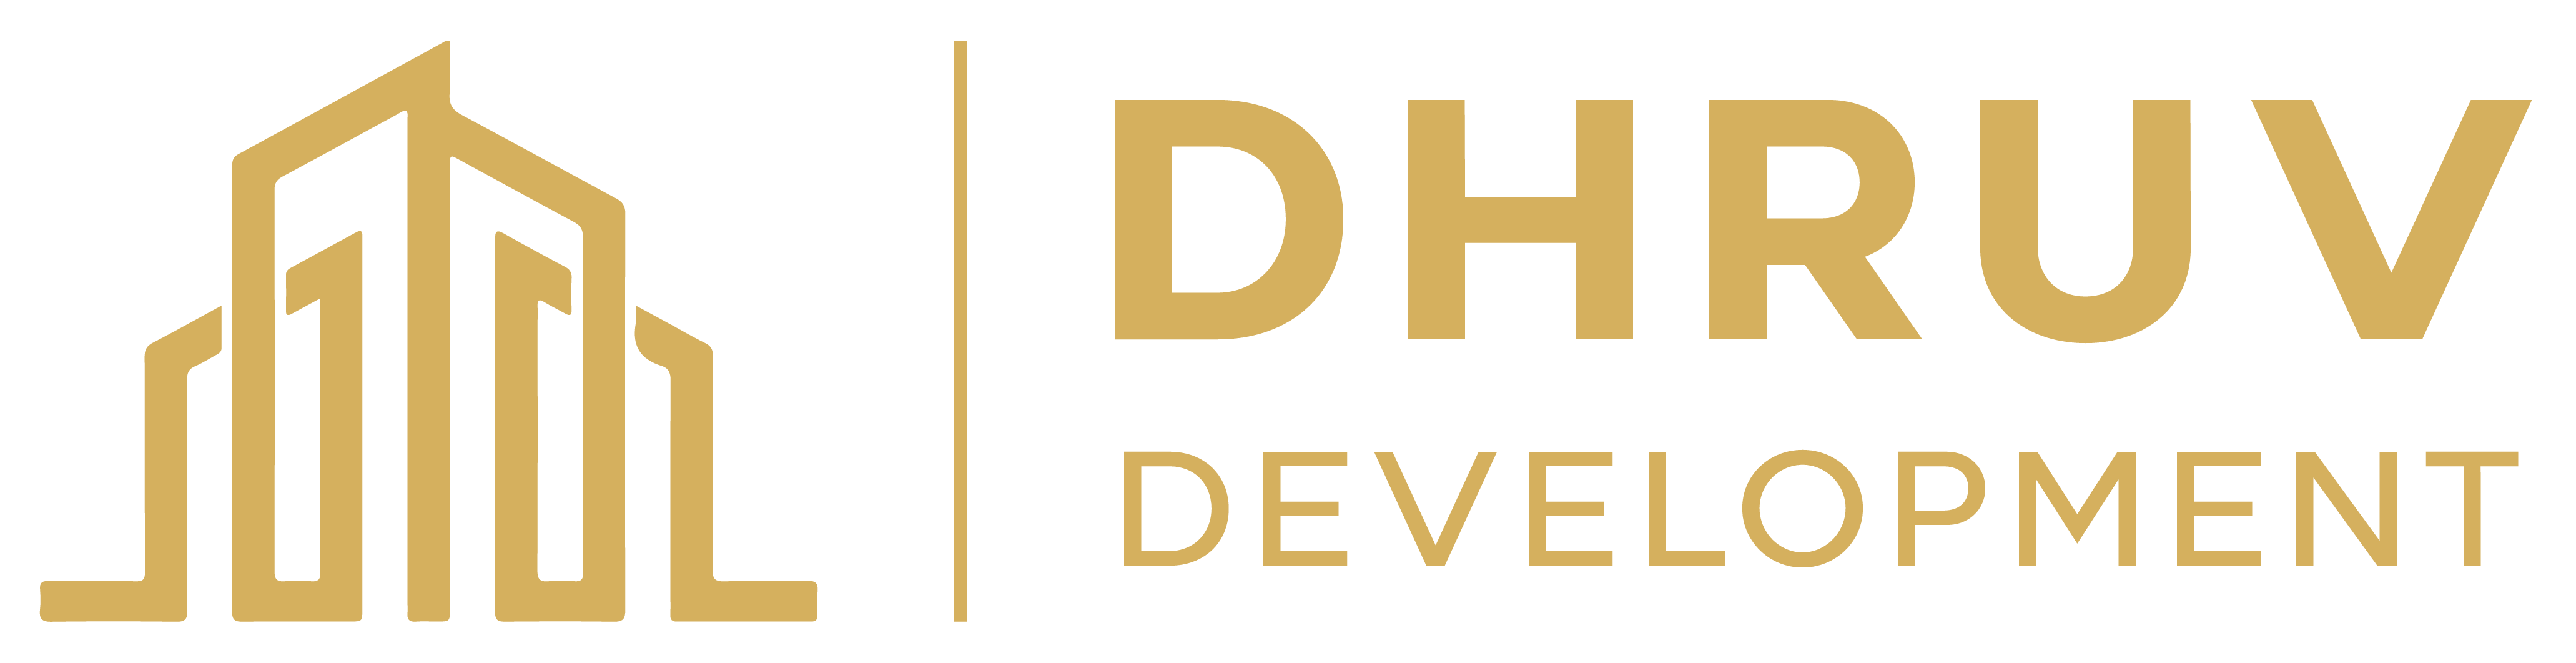 Welcome to Dhruv Development